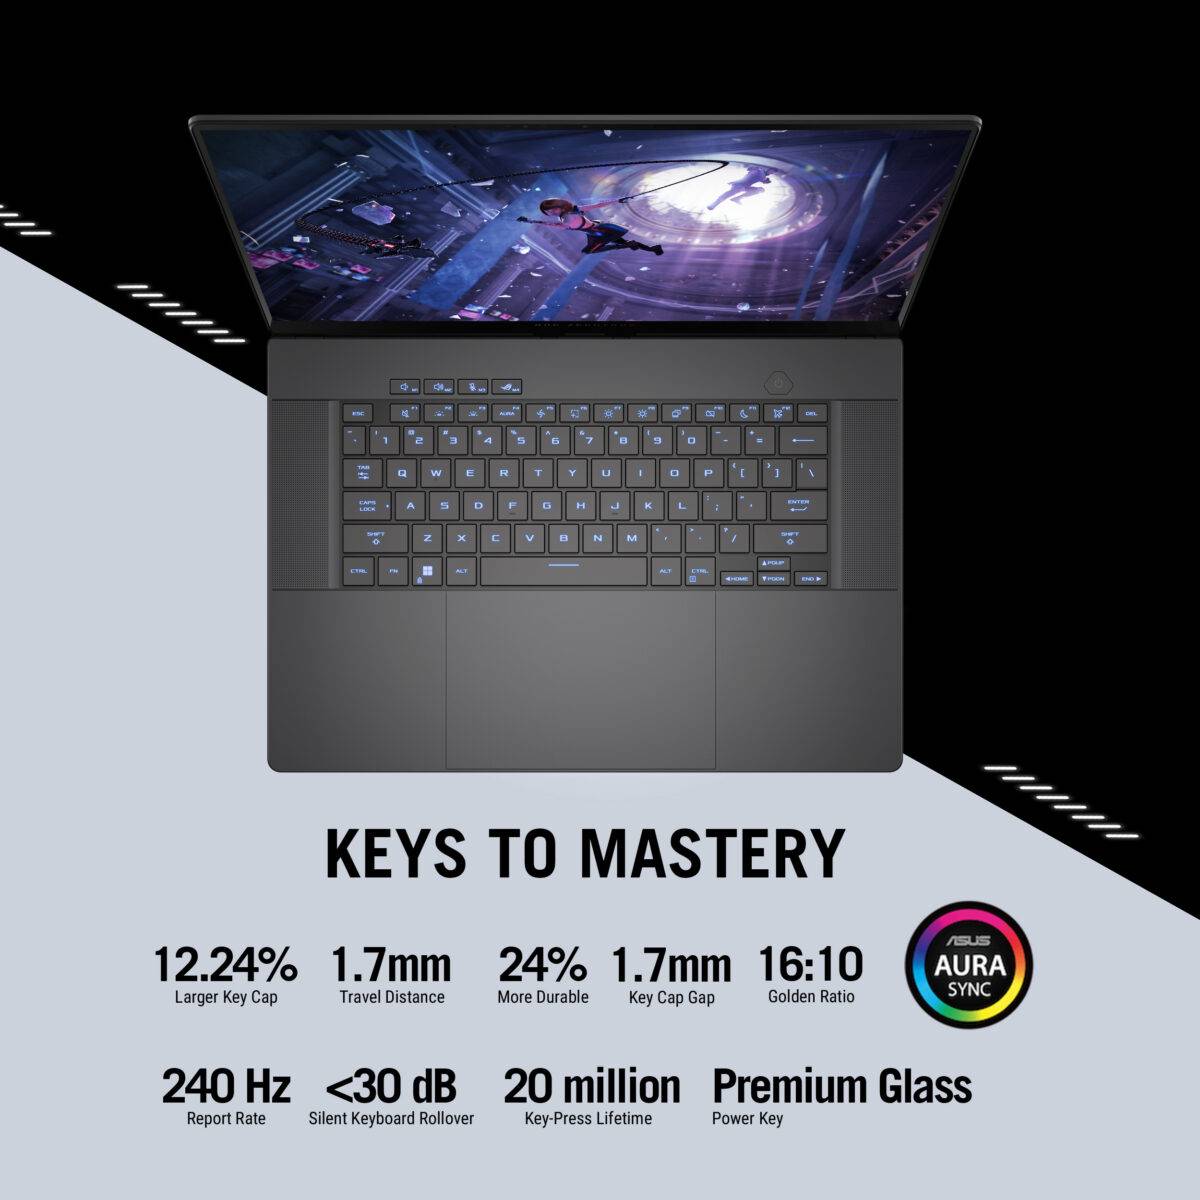 Keys To Mastery The trackpad and keyboard are critical for controlling your laptop, so we spared no expense with the design of the Zephyrus G16. Despite being just a 16-inch device, the G16 boasts a large 16:10 aspect ratio, matching the proportions of the screen itself effortless scrolling. We’ve also increased the keycap size by 12% for smoother typing as well, thanks to extra rigidity from the CNC machining. An extra long 1.7mm travel distance gives the keyboard a premium typing feel, and with a lifetime of 20 million presses, it’s a perfect long-term partner. 12% Larger Key Cap 1.7mm Travel Distance 24% More Durable 1.7mm Key Cap Gap 16:10 Golden Ratio 240 Hz Report Rate < 30dB Silent Keyboard Rollover 20 million Key-Press Lifetime Premium Glass Power Key